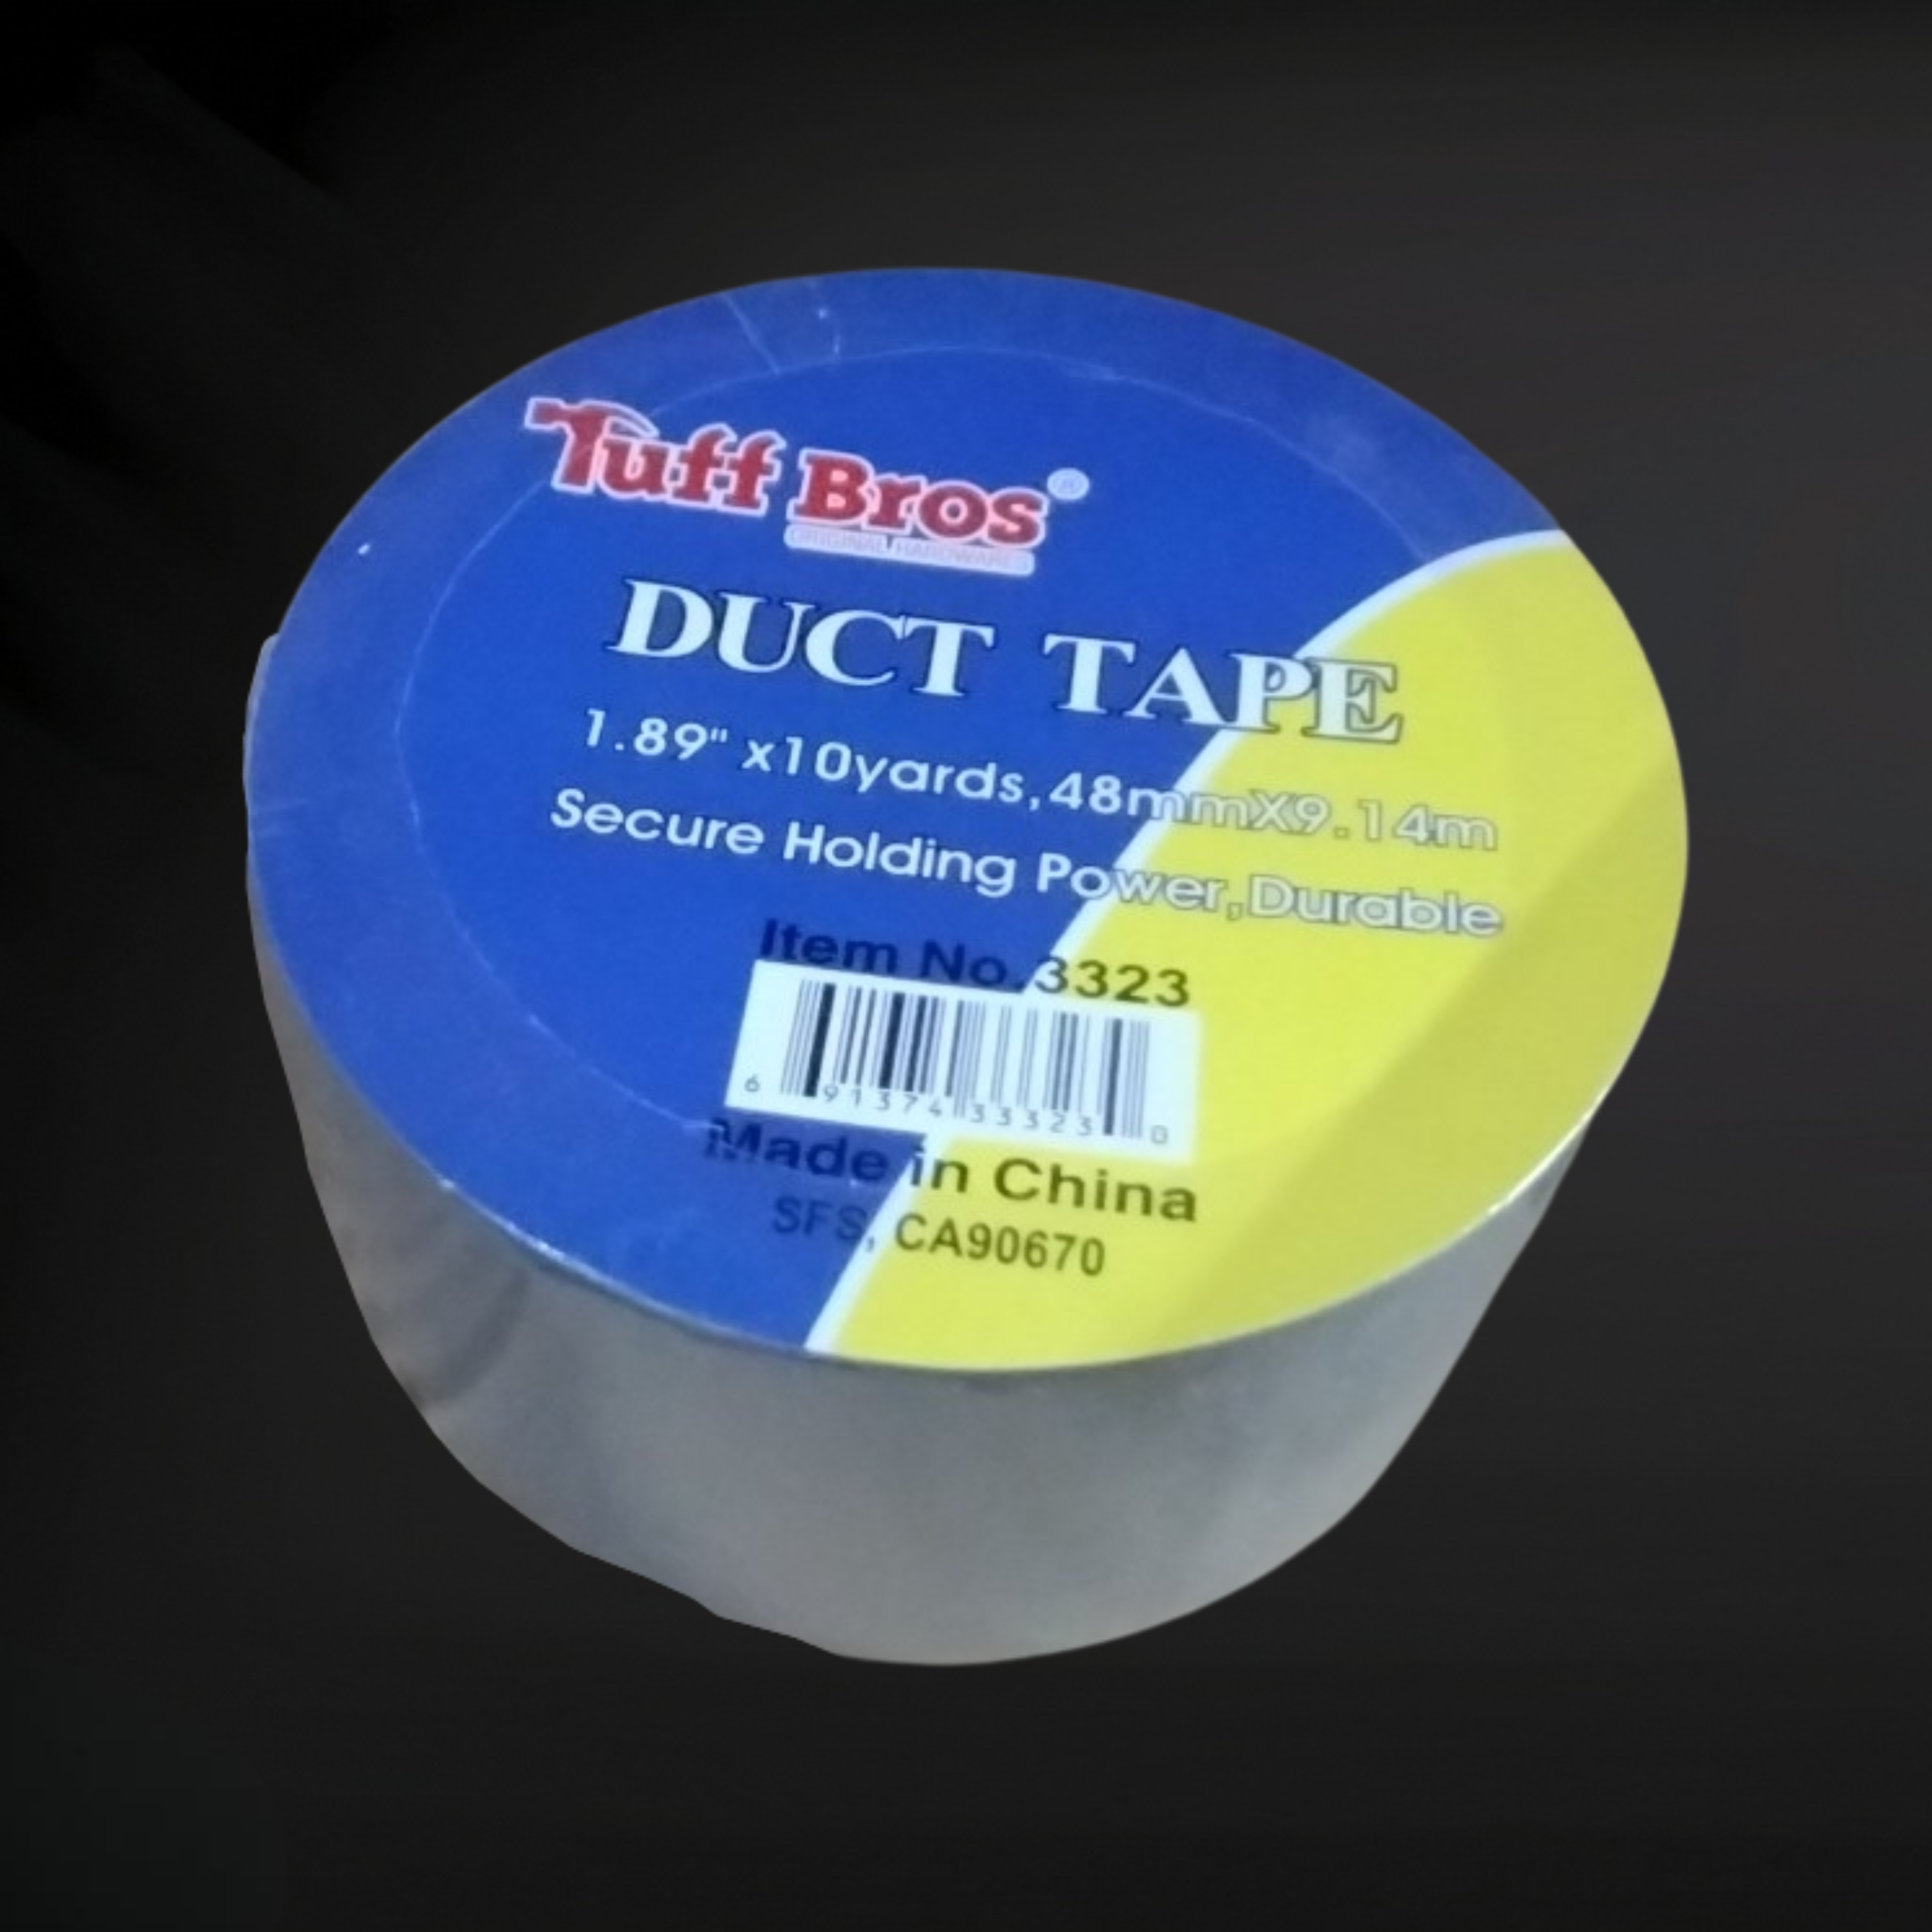 Duct TAPE